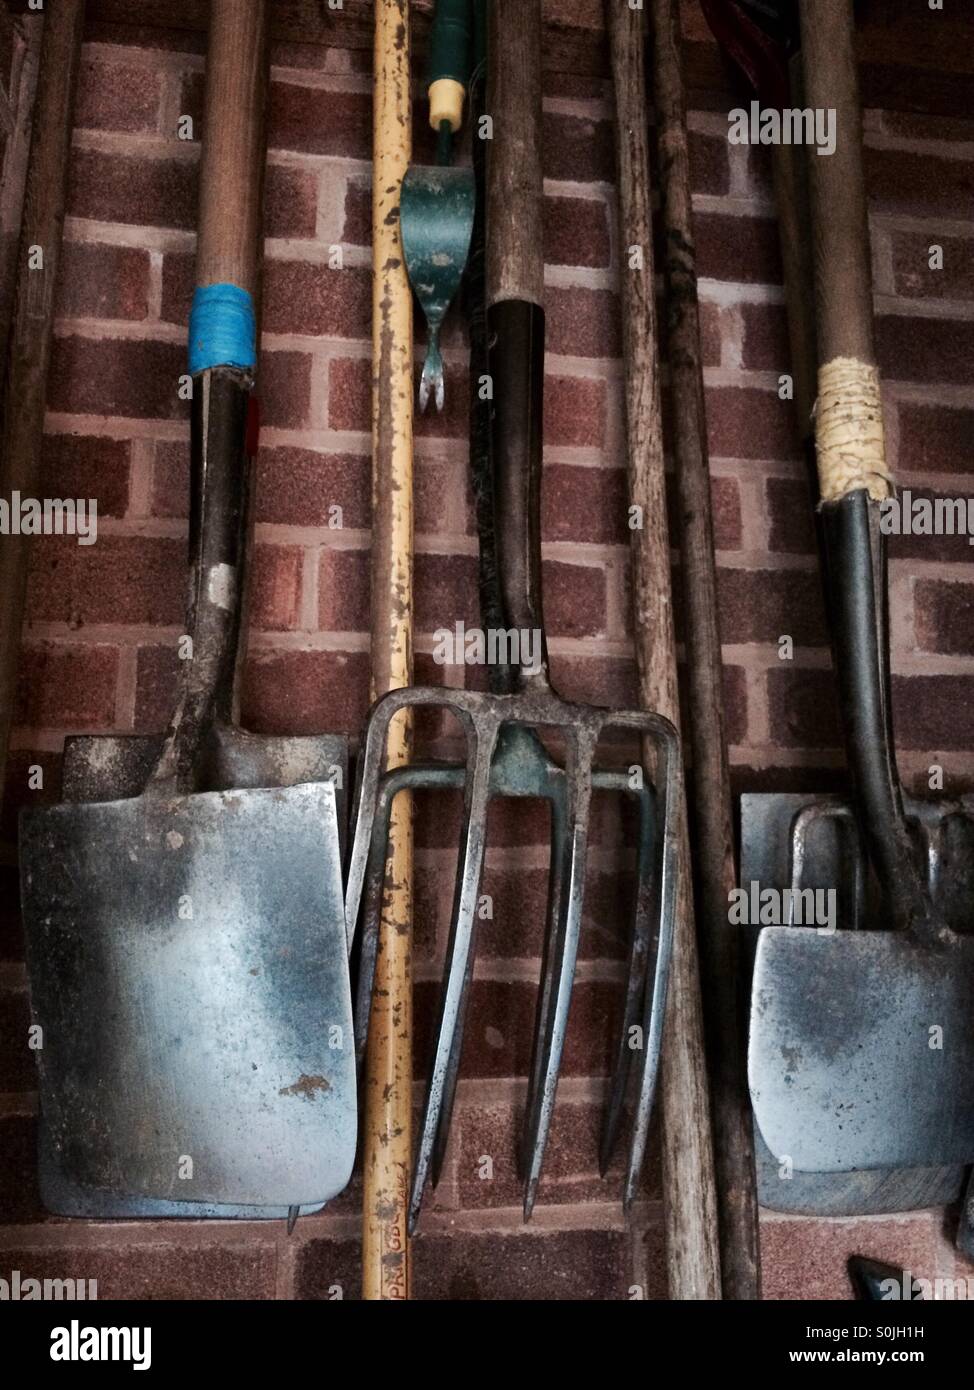 Well loved garden tools Stock Photo